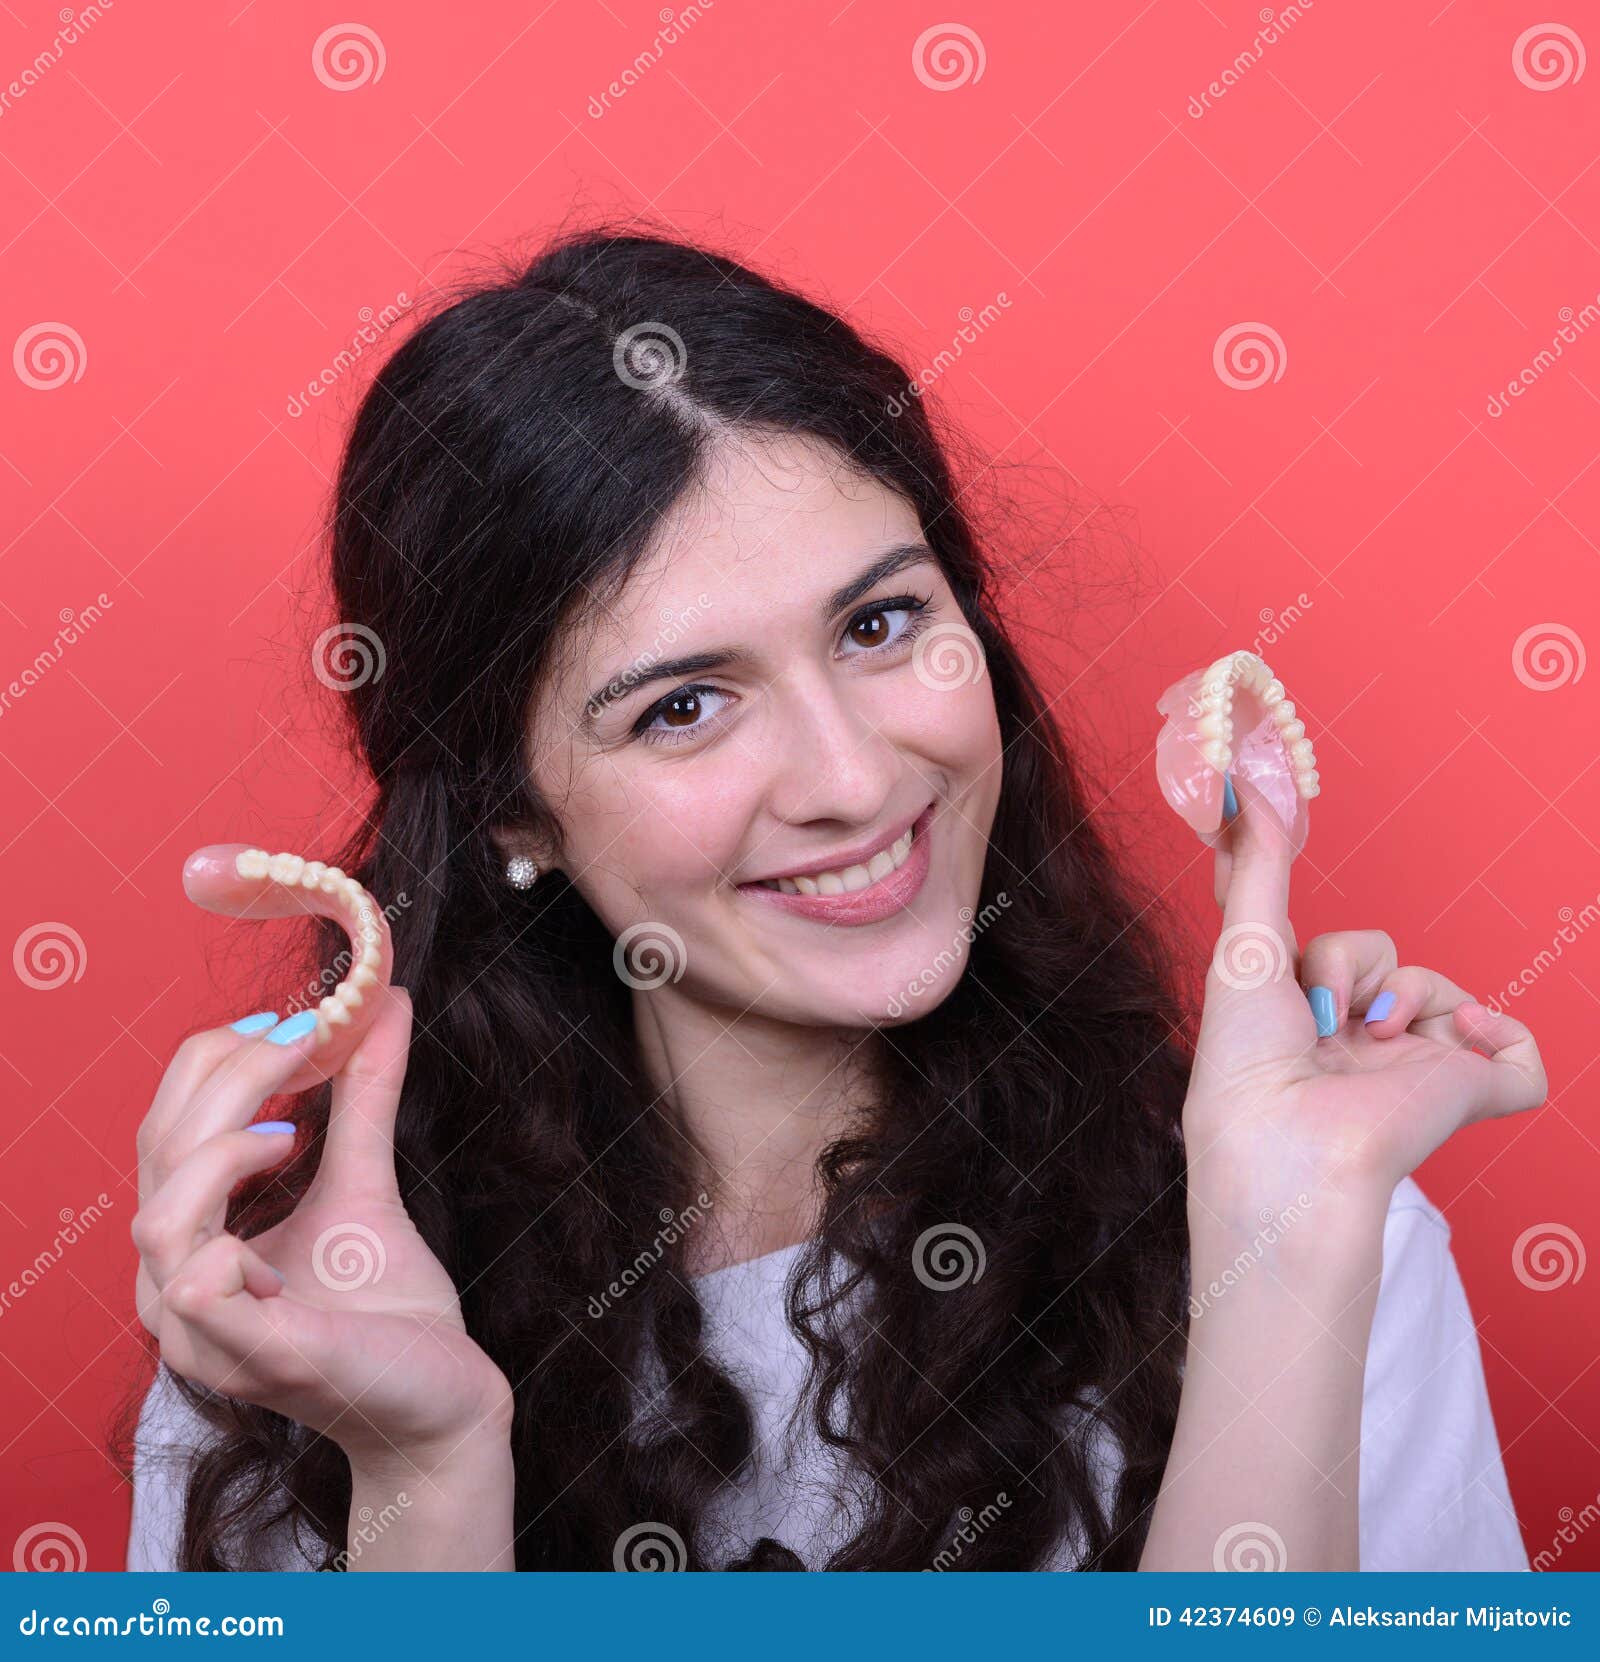 portrait-happy-woman-healthy-smile-holding-denture-again-image-made-studio-model-standing-against-colored-42374609.jpg